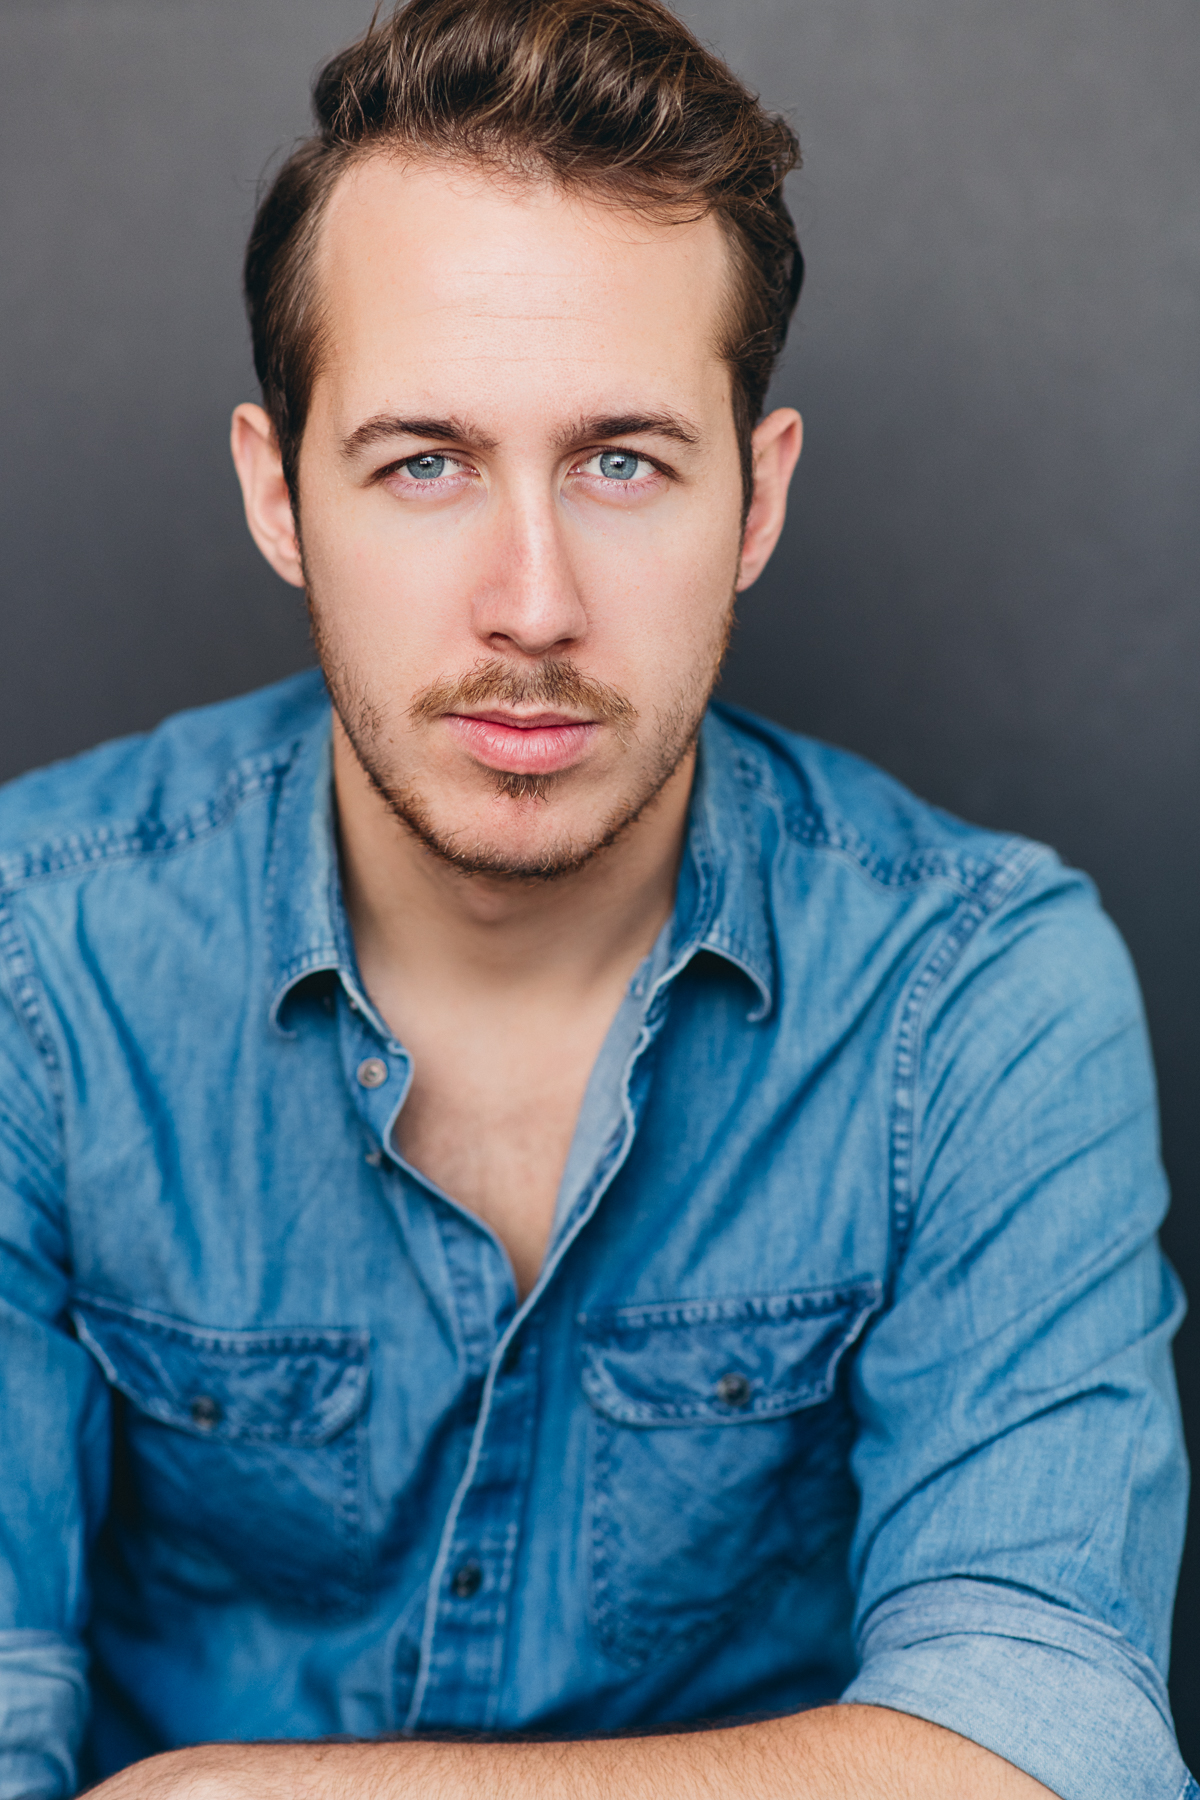 Portrait of Bryan in a blue denim buttoned-up shirt, in front of a grey background. They are looking directly at the camera.